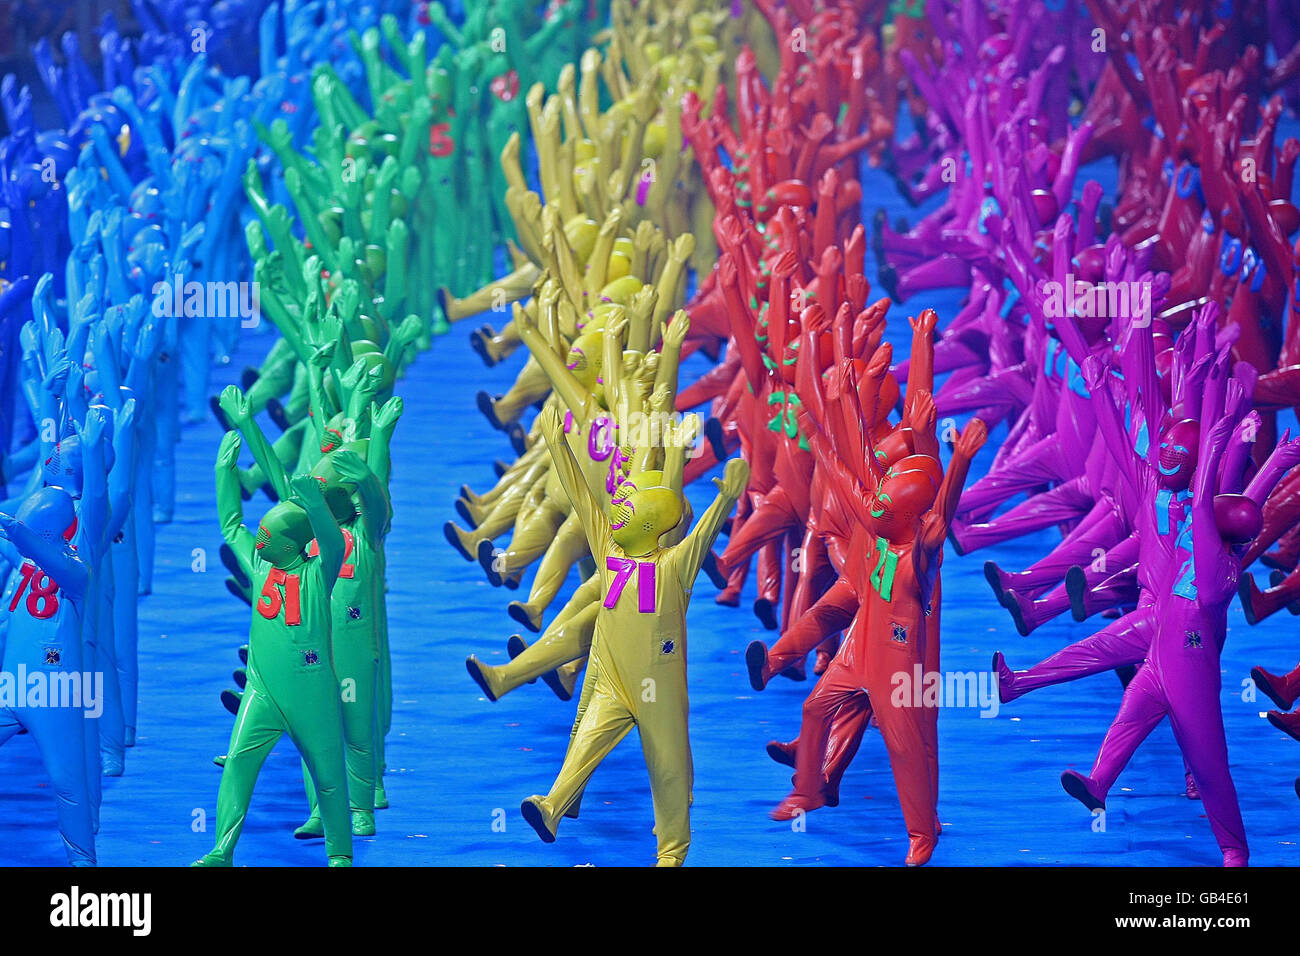 A Scene from the Beijing Paralympic Games 2008 Opening Ceremony at the National Stadium, Beijing, China. Stock Photo